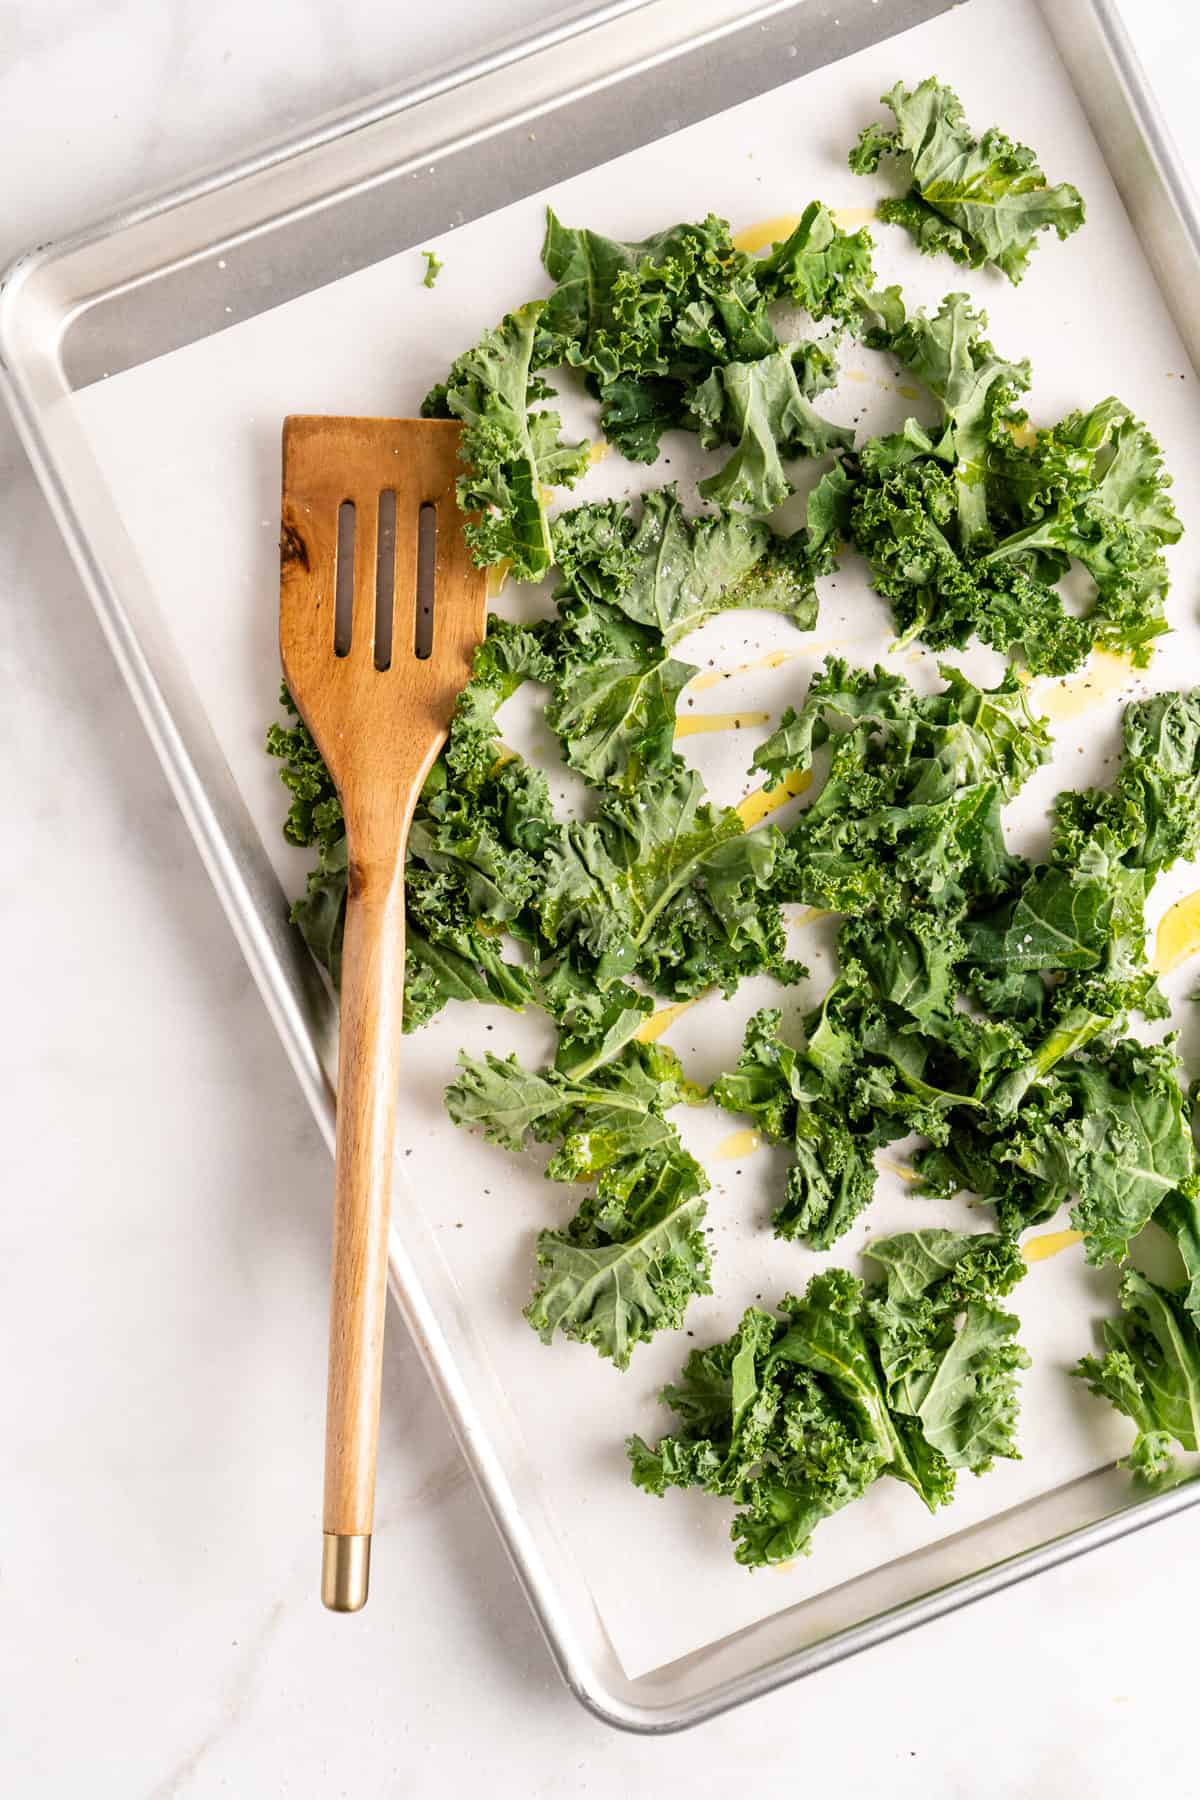 Overhead view of kale leaves on parchment-lined sheet pan with wooden spatula